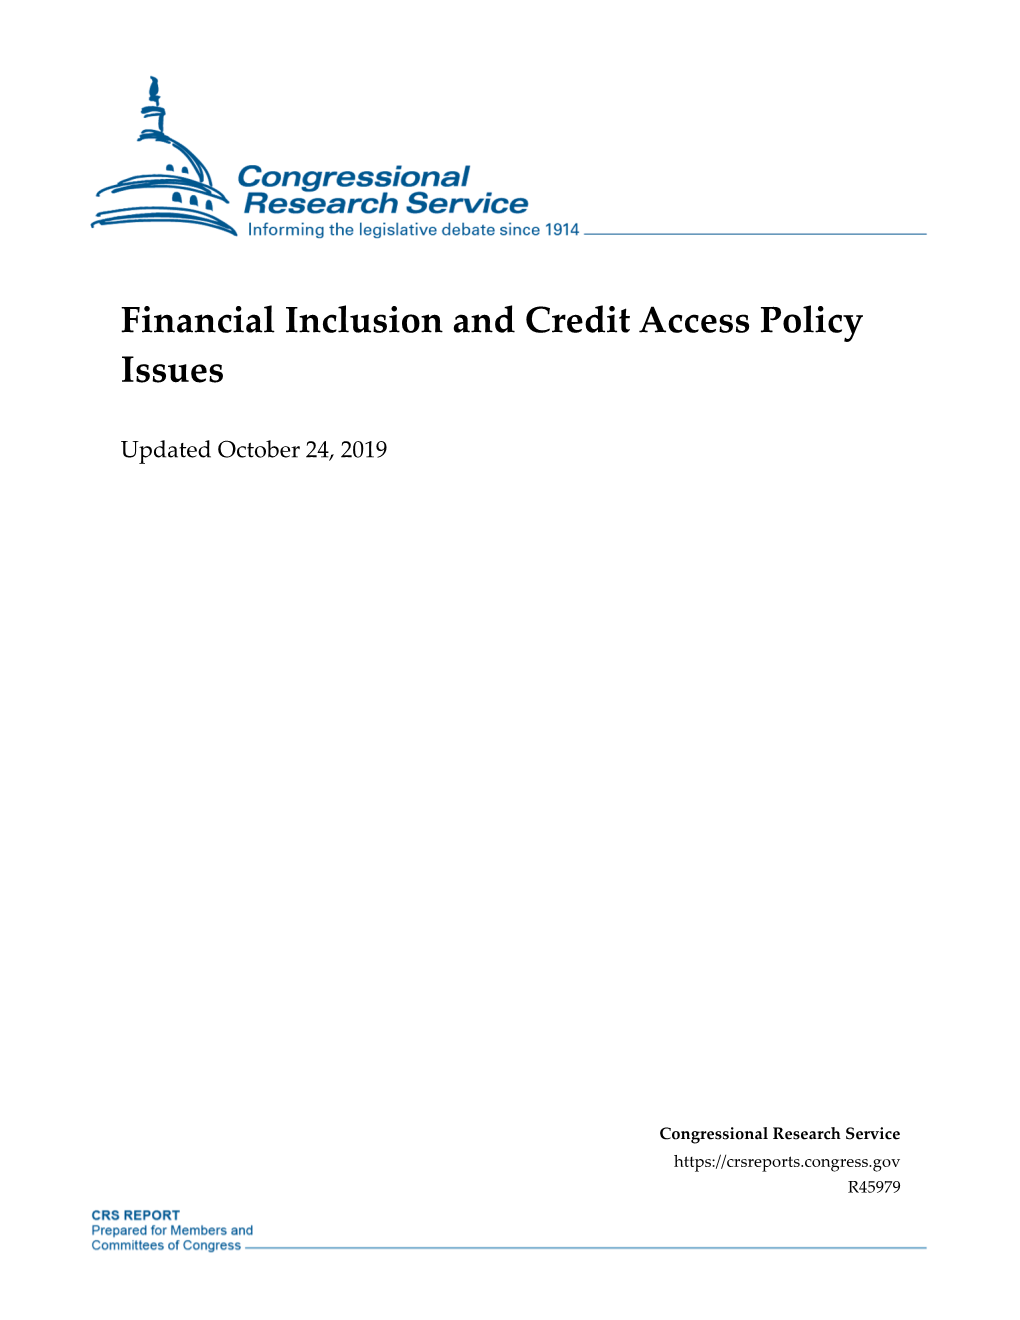 Financial Inclusion and Credit Access Policy Issues